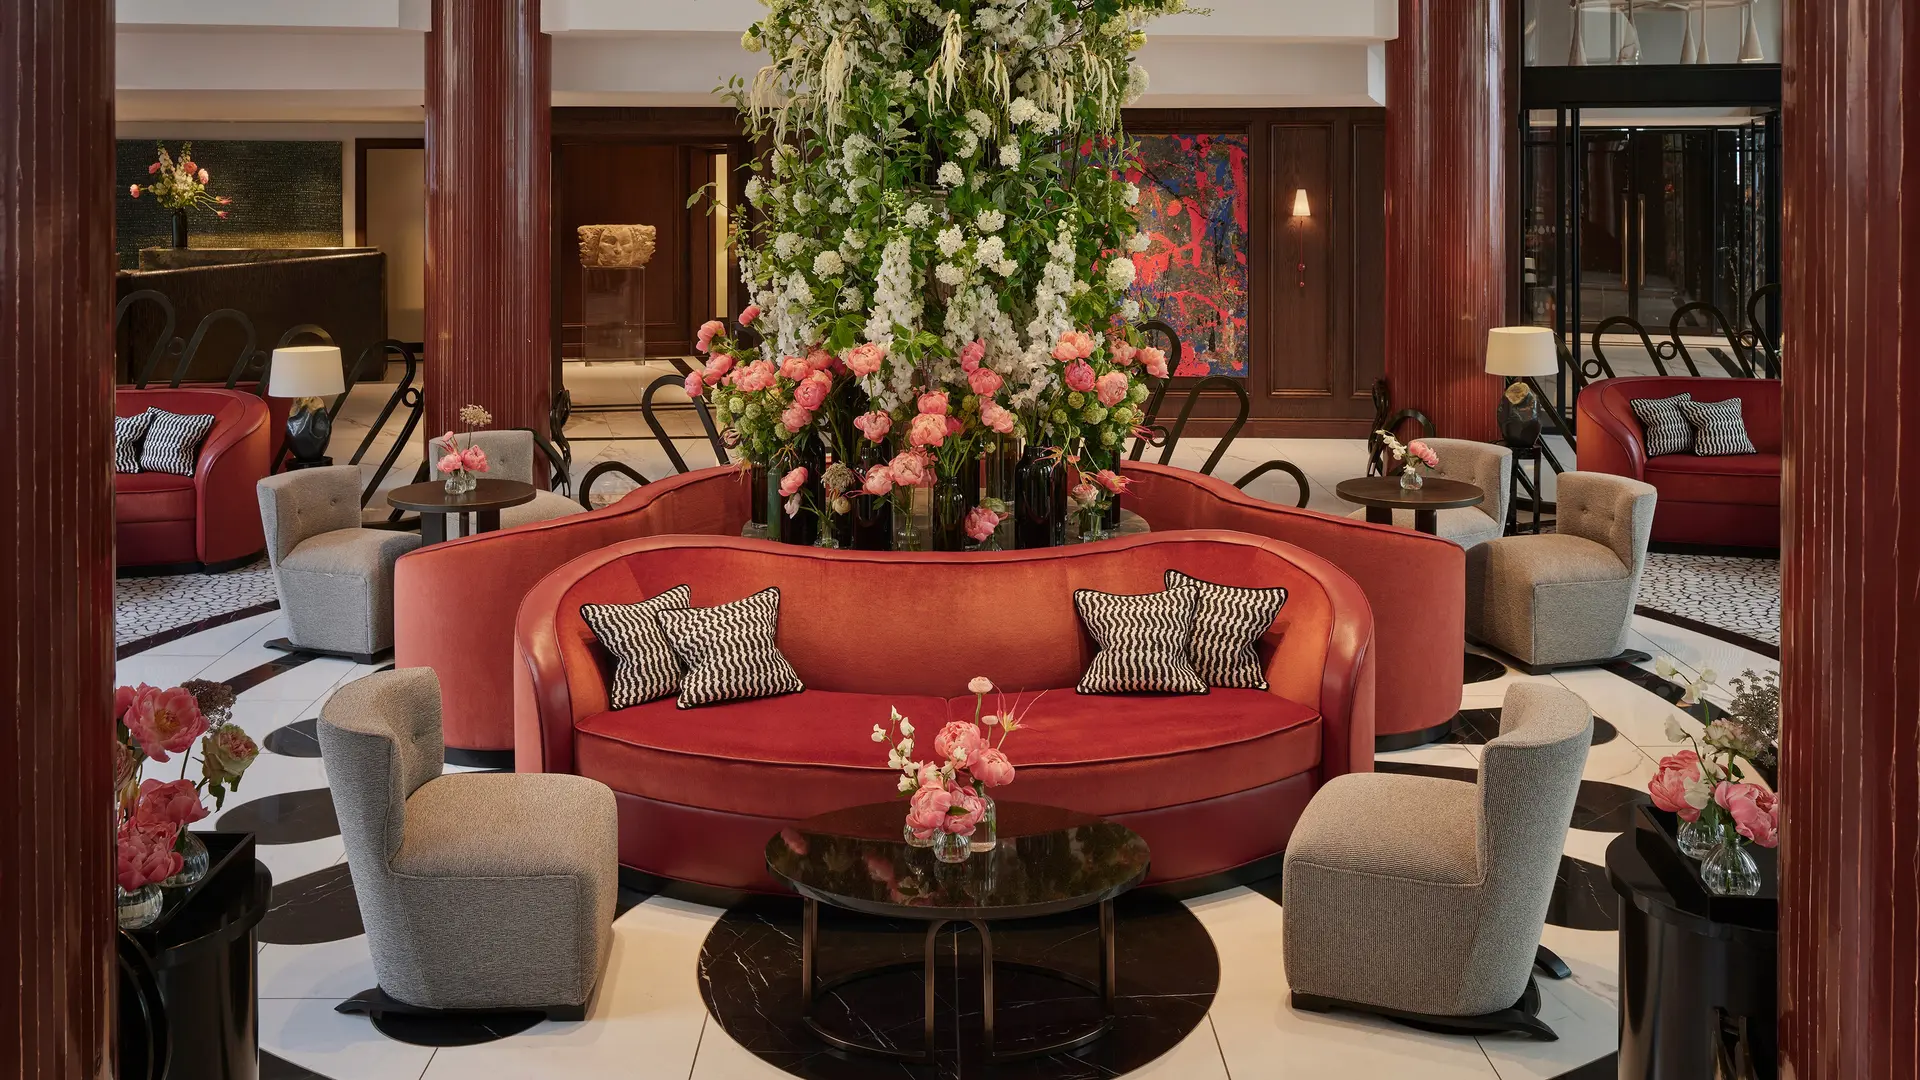 Hotel review Restaurants & Bars' - One Aldwych - 3